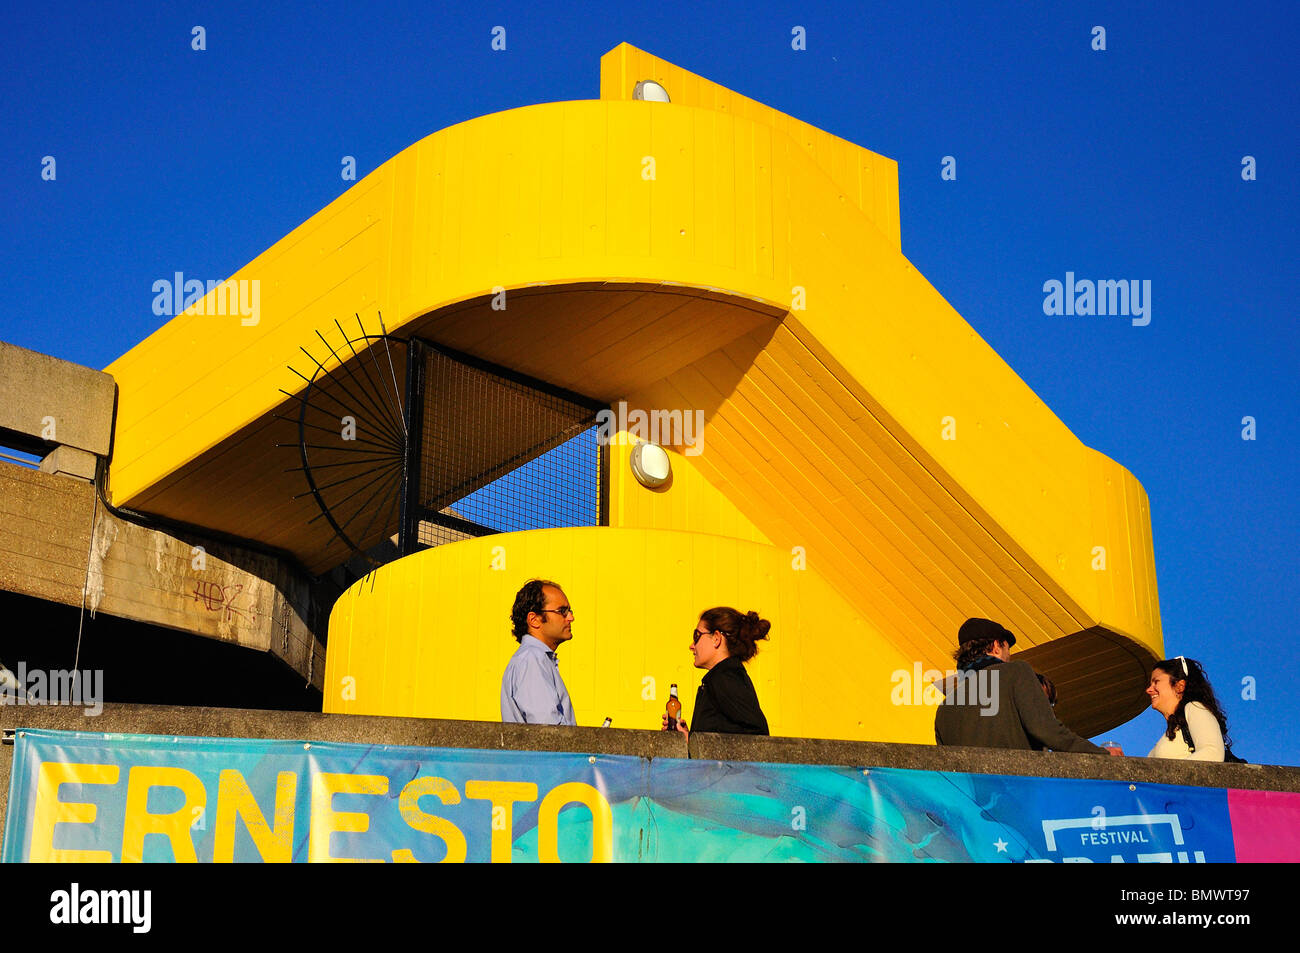 People Socializing drinking on balcony with abstract yellow stairs Stock Photo